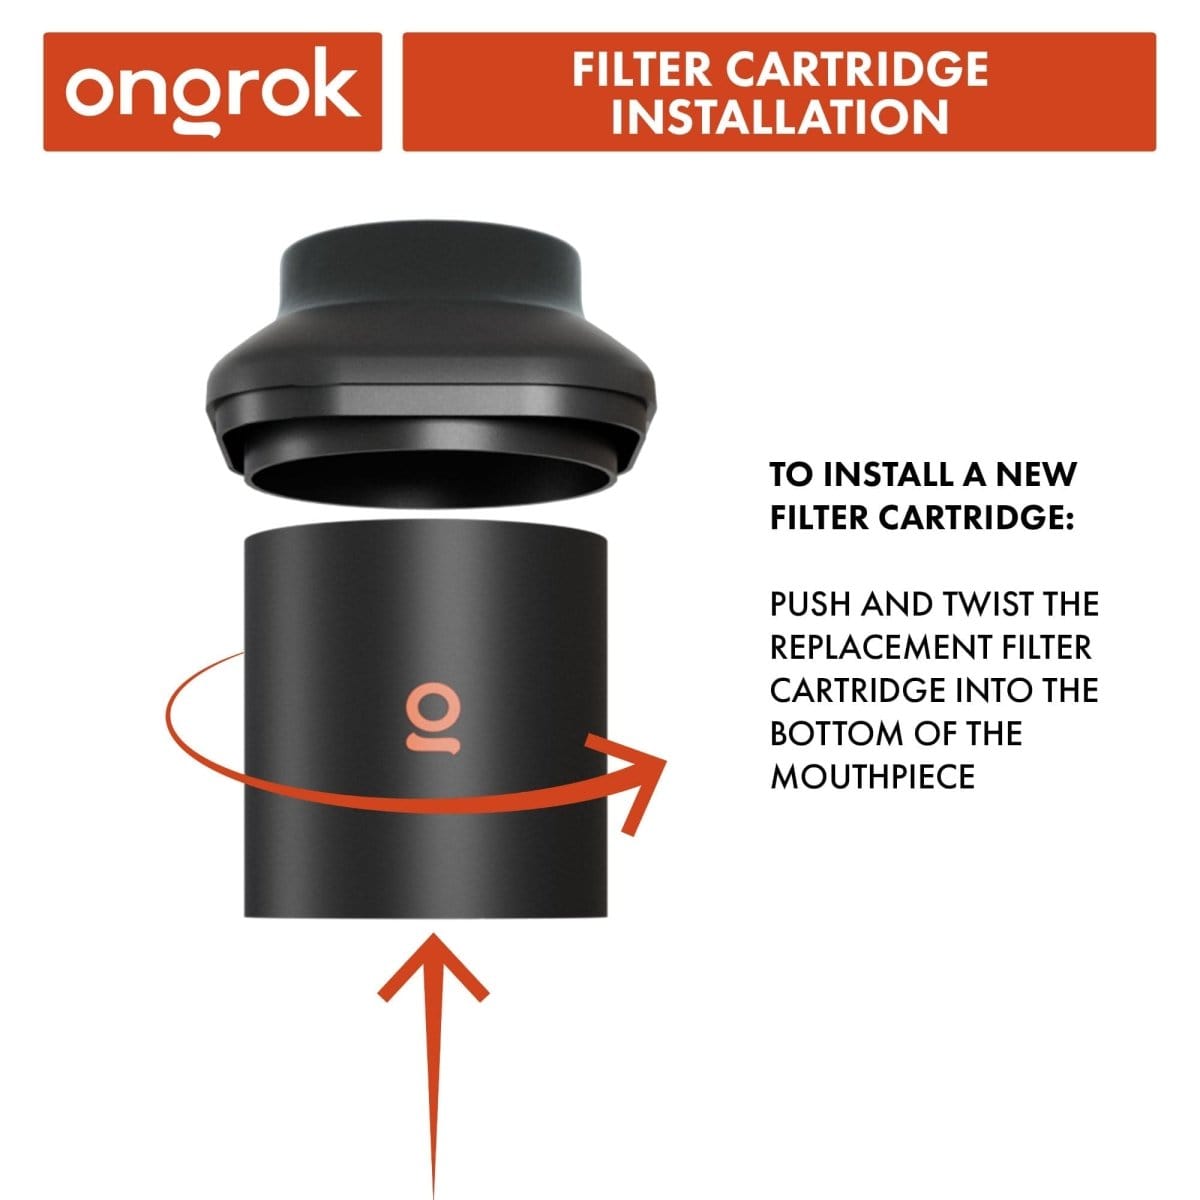 ONGROK USA Personal Air Filter with Replaceable Cartridges